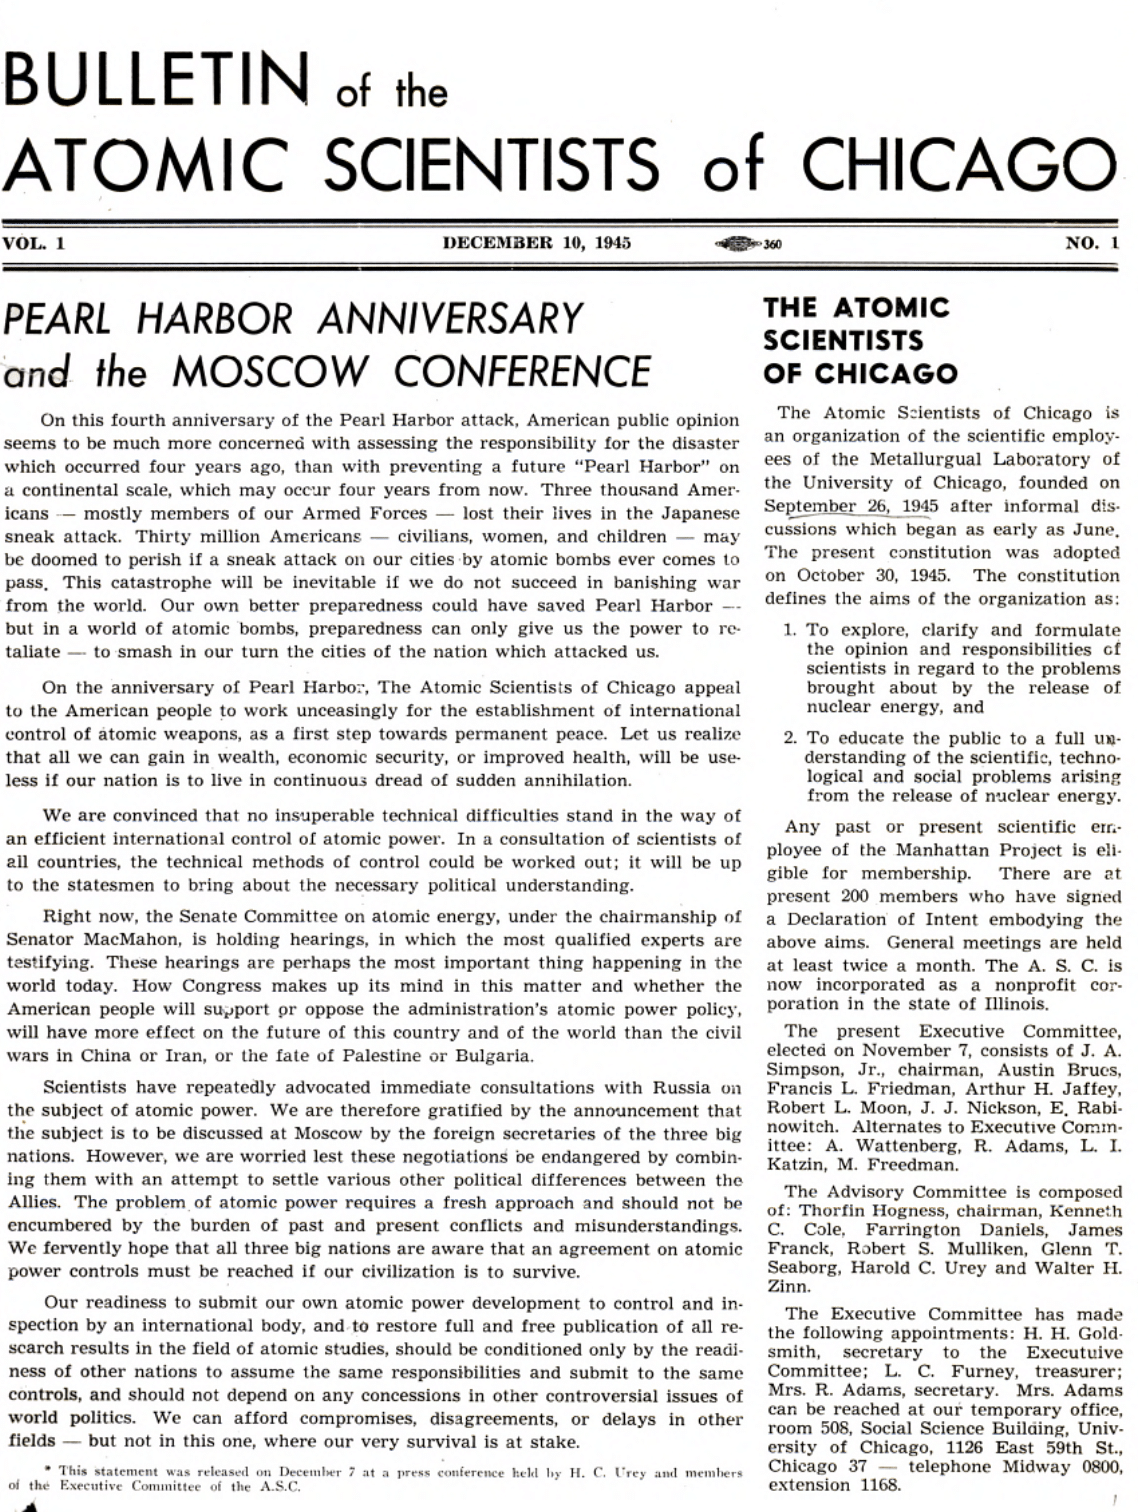 The Bulletin's first issue, dated Dec. 10, 1945